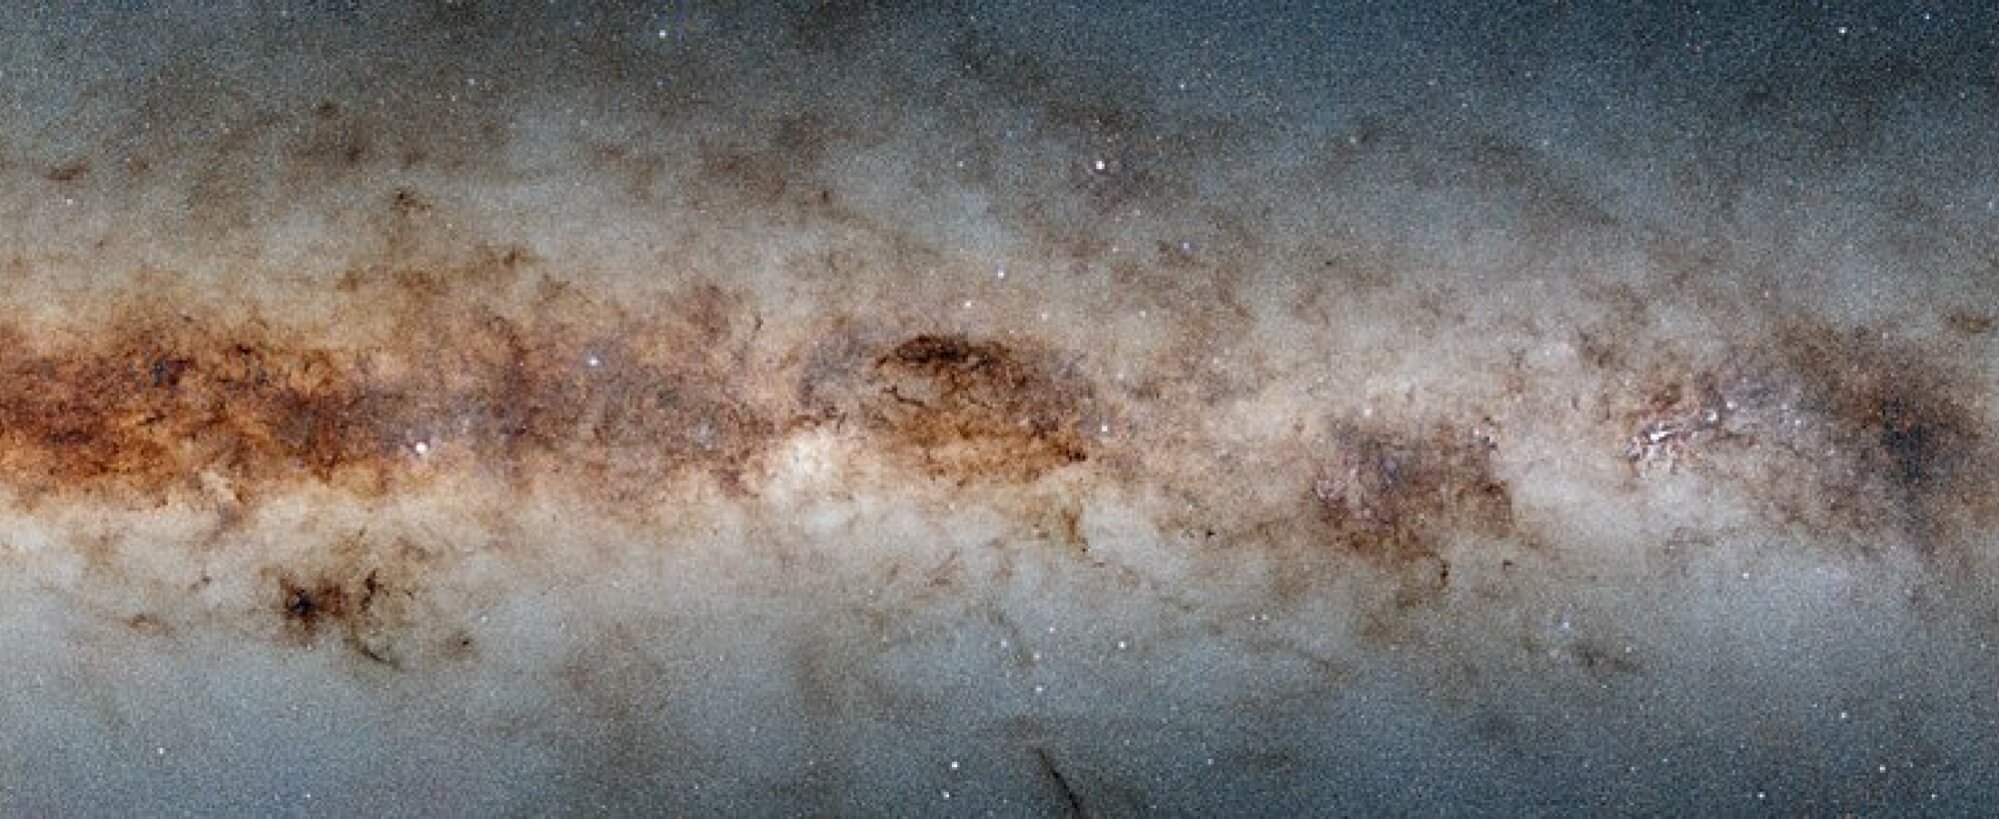 a panoramic view of the Milky Way galaxy